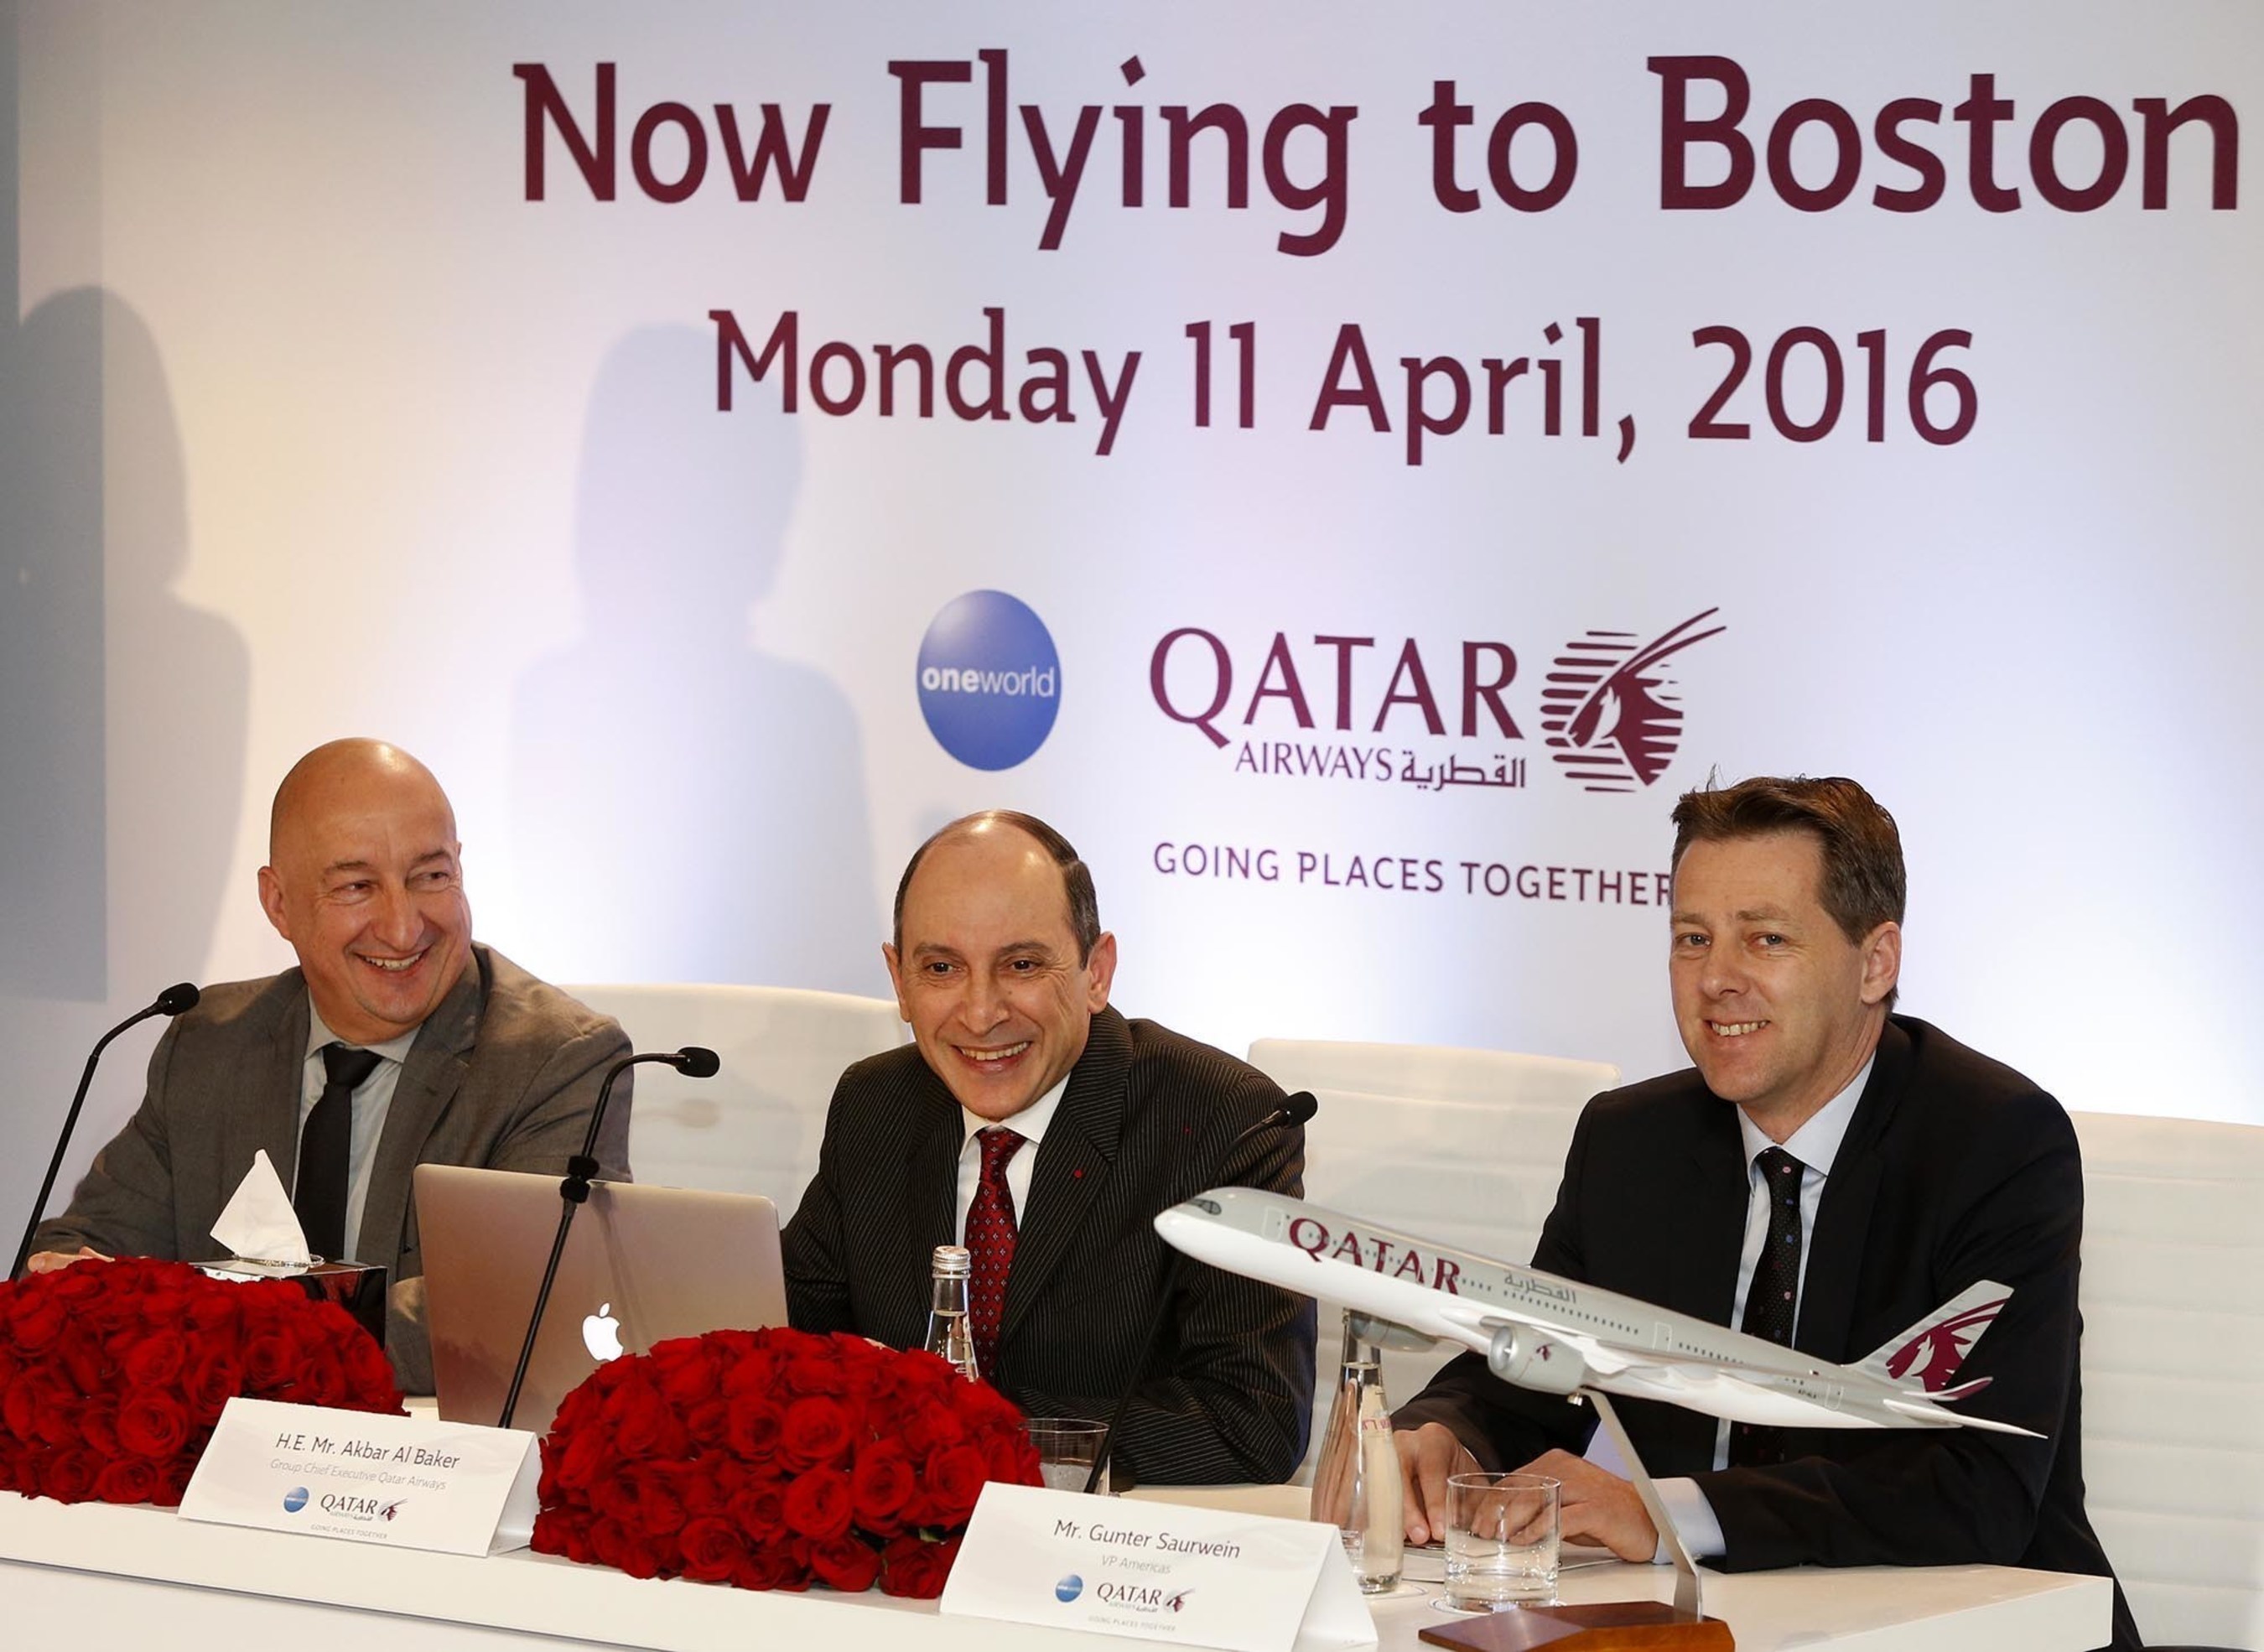 Qatar Airways Holds Press Conference to mark the start of the airline's Boston route Launch